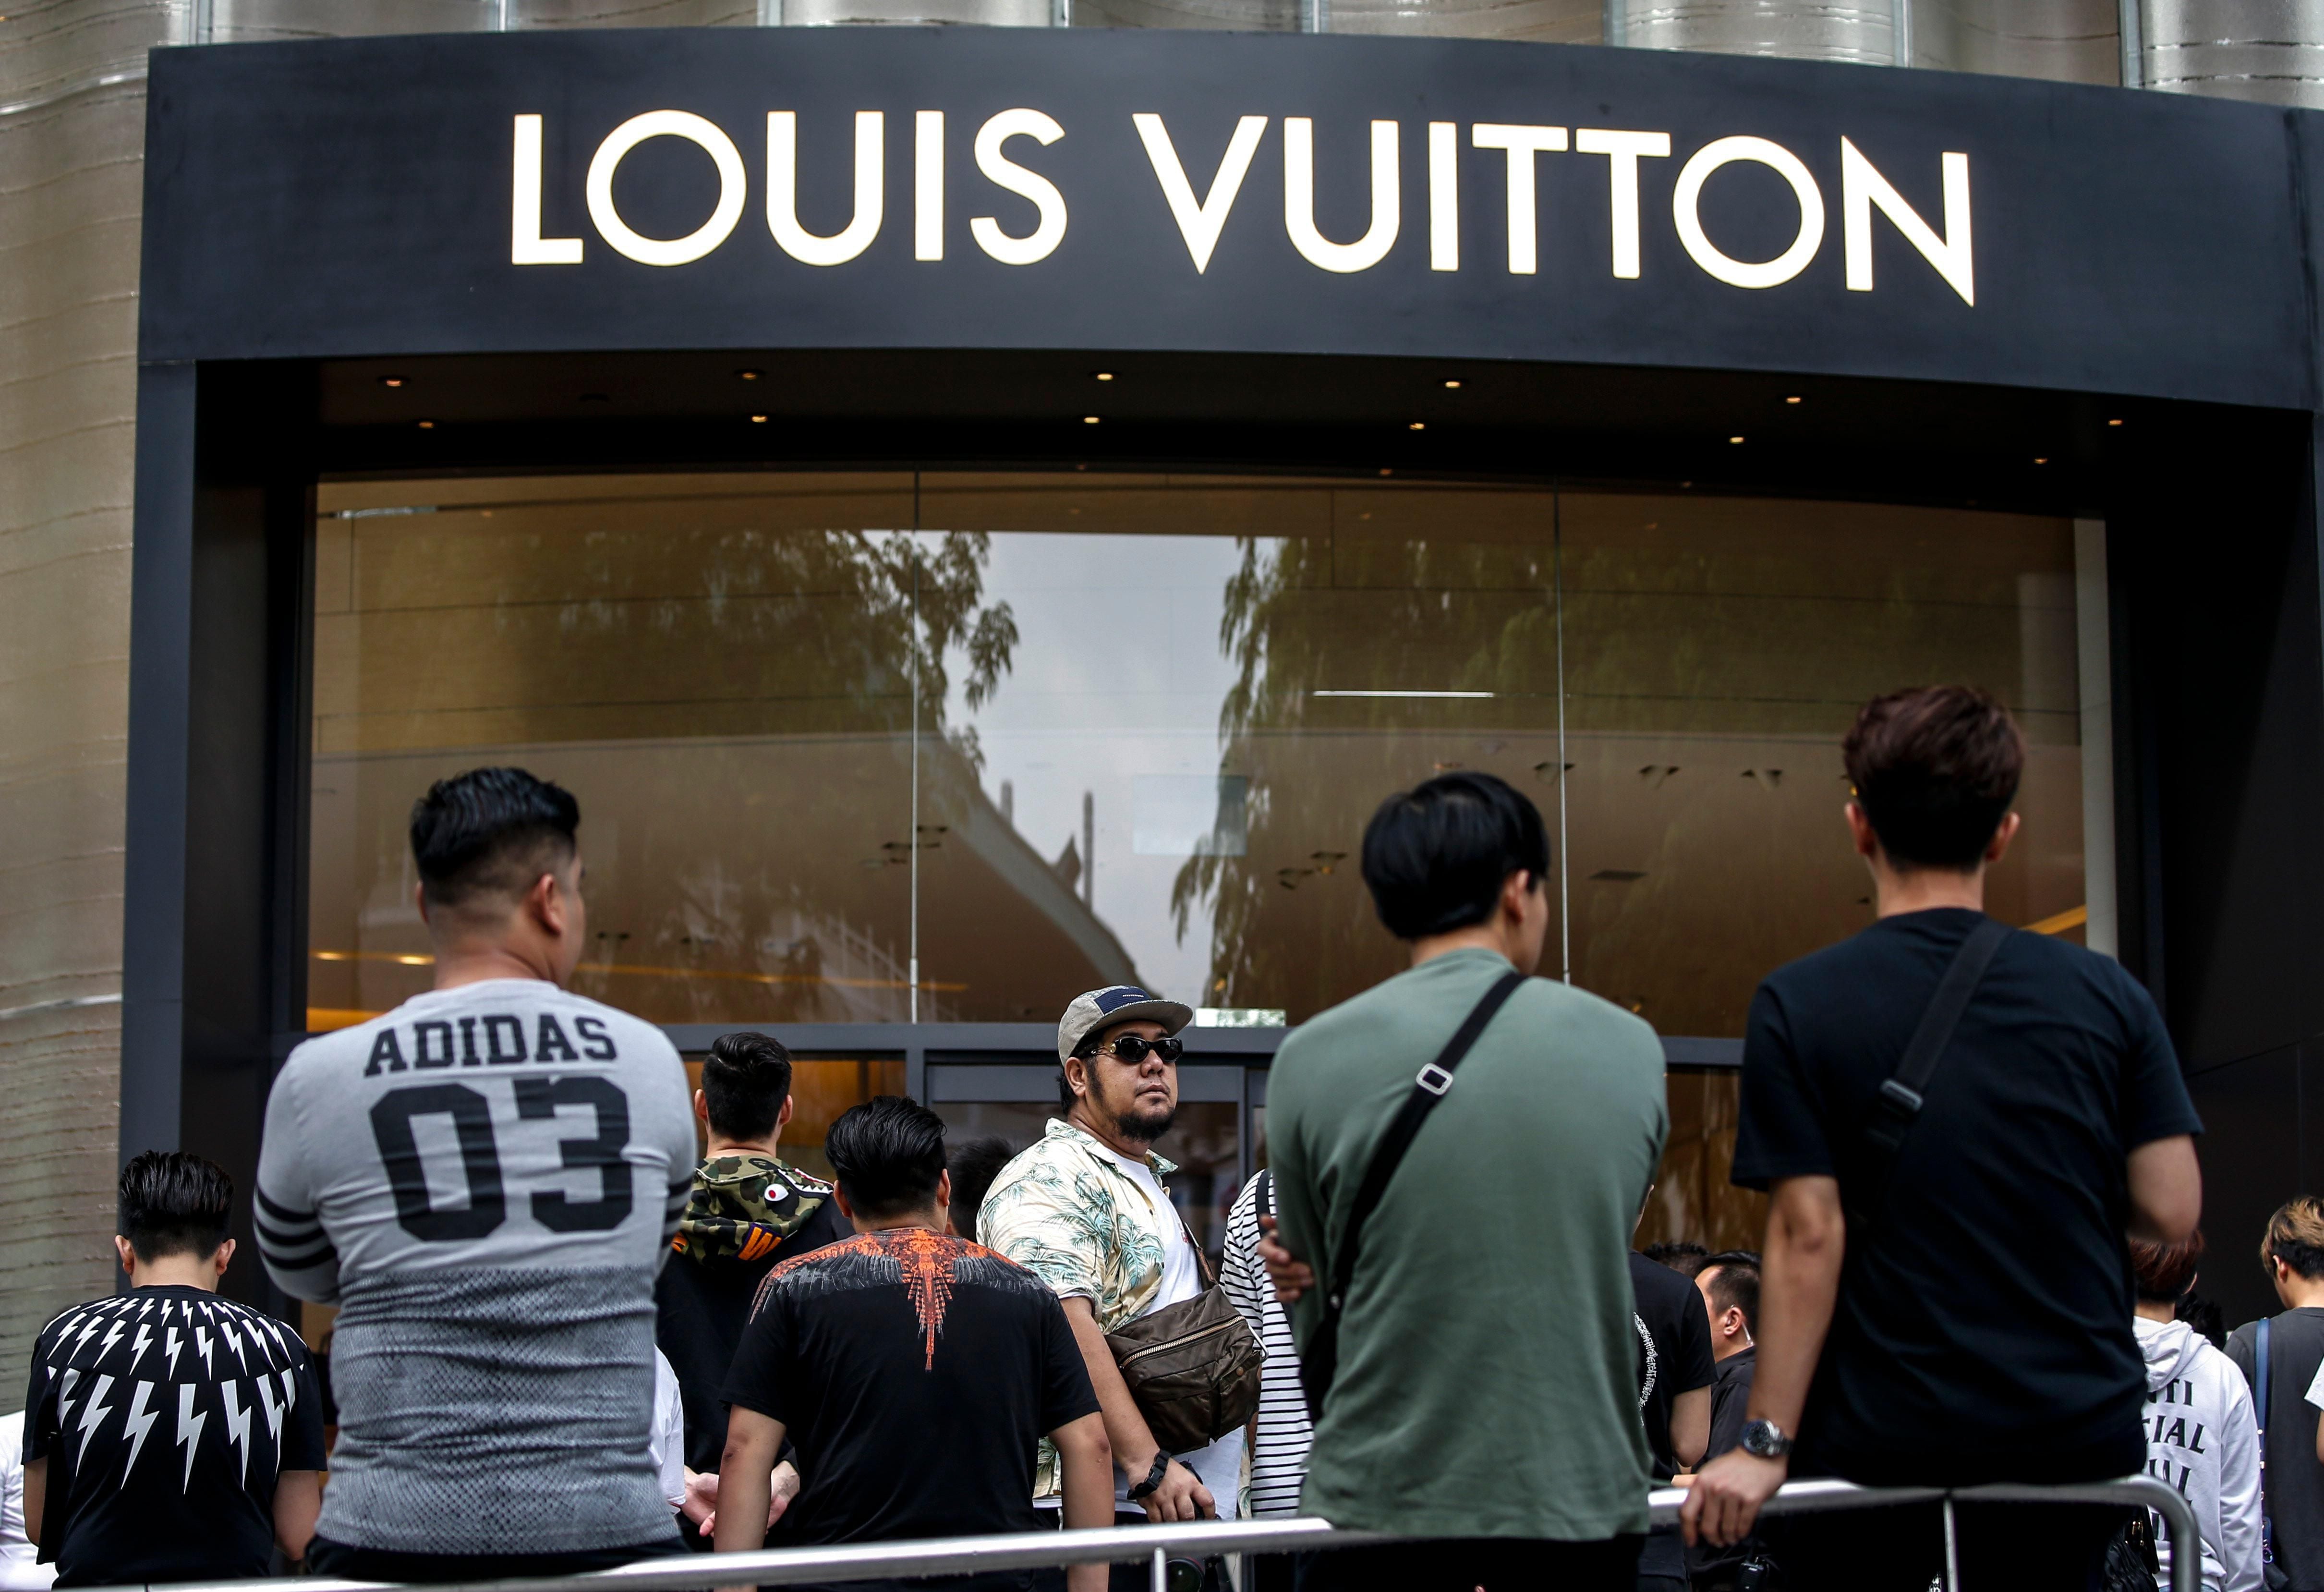 Louis Vuitton opens account on Chinese social commerce site